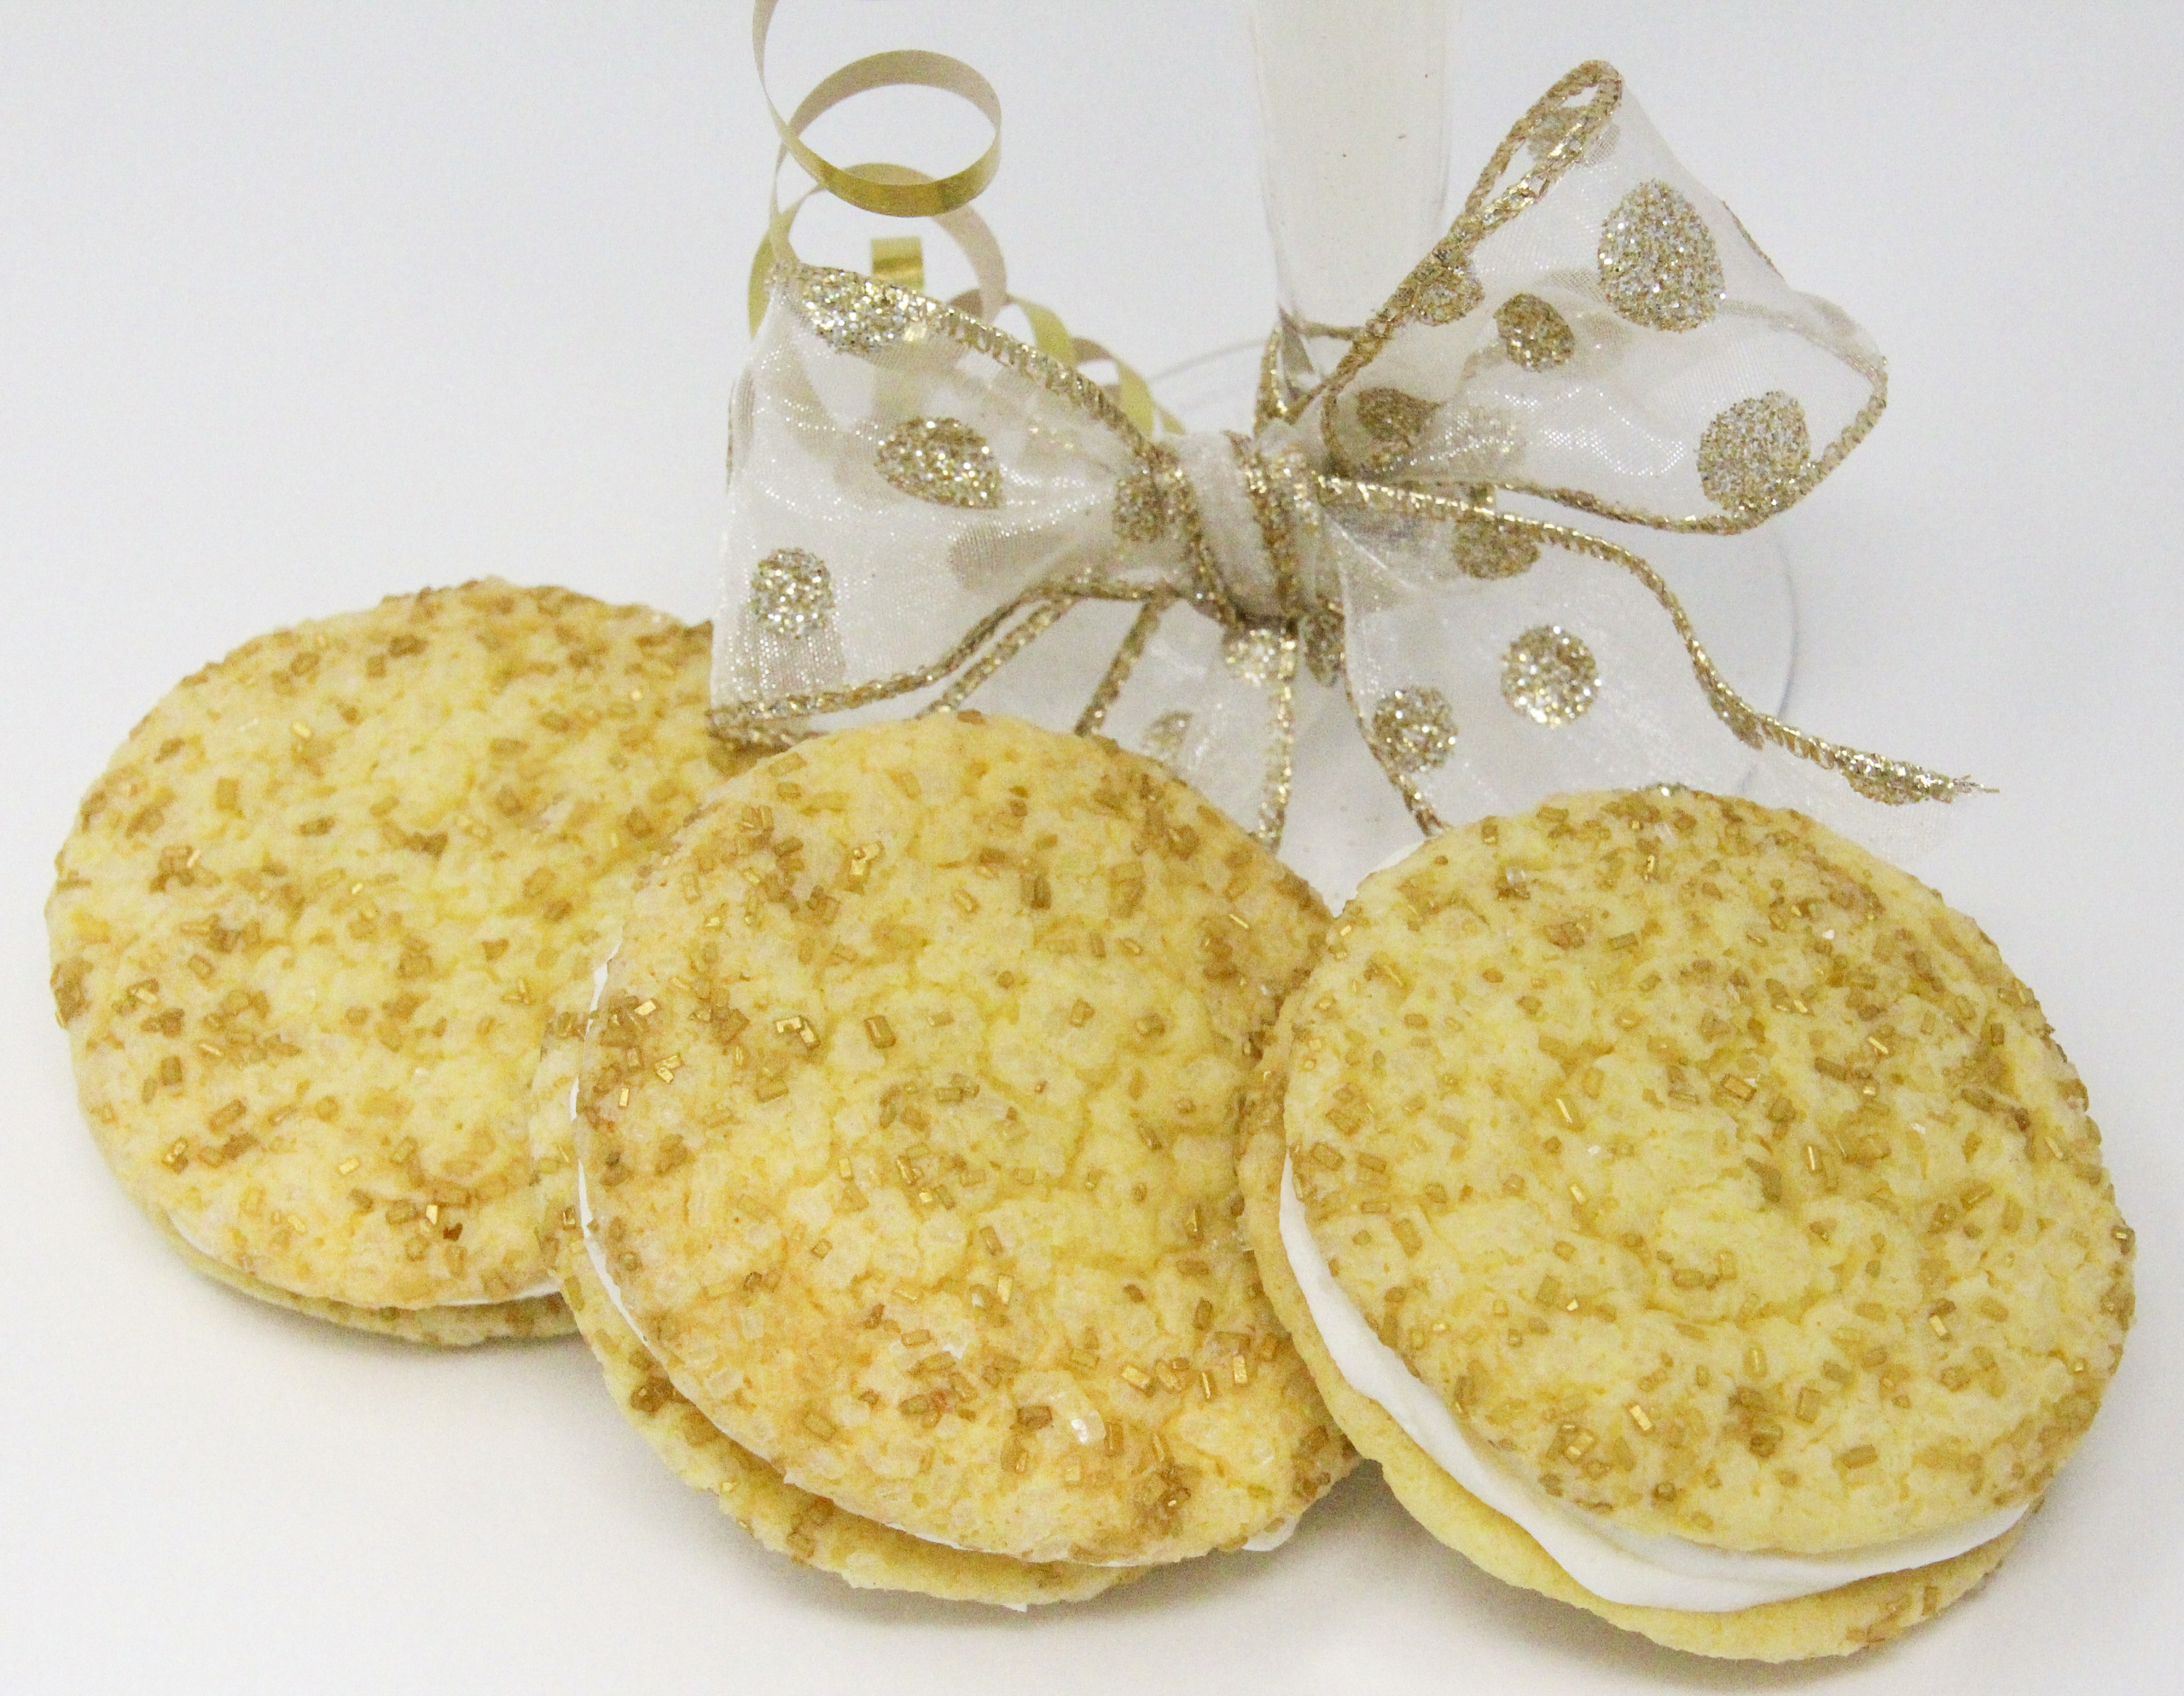 Champagne Crème Sandwich Cookies are soft-style cookies flavored with champagne and a layer of champagne-flavored buttercream. With sparkling white and gold sprinkles, these cookies will wow your guests and add a festive touch to your dessert table. Recipe created by Cinnamon & Sugar for BAKE, BATTER, AND ROLL by Catherine Bruns. 